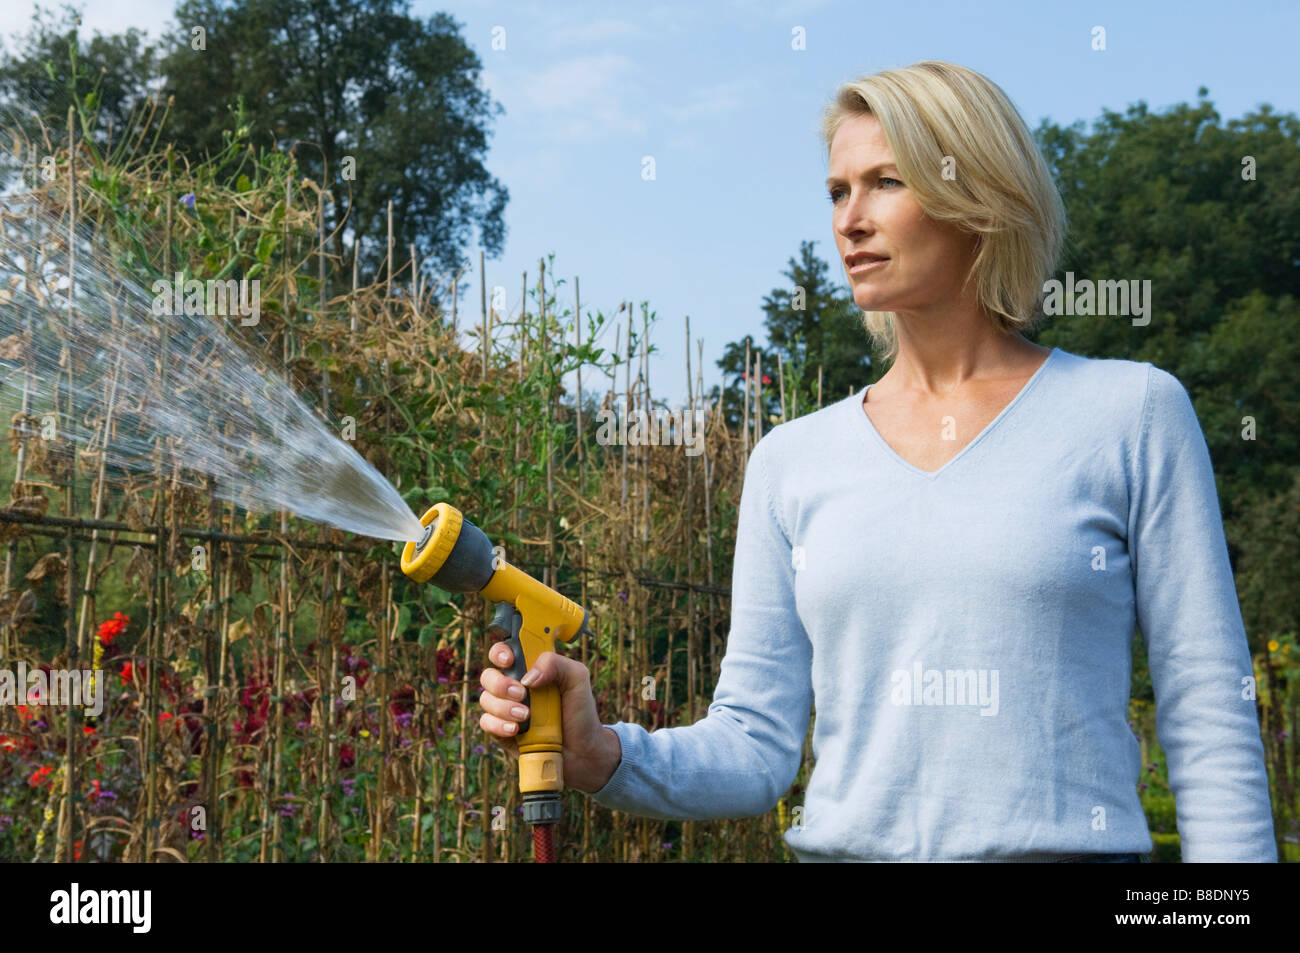 Woman with hose pipe Stock Photo